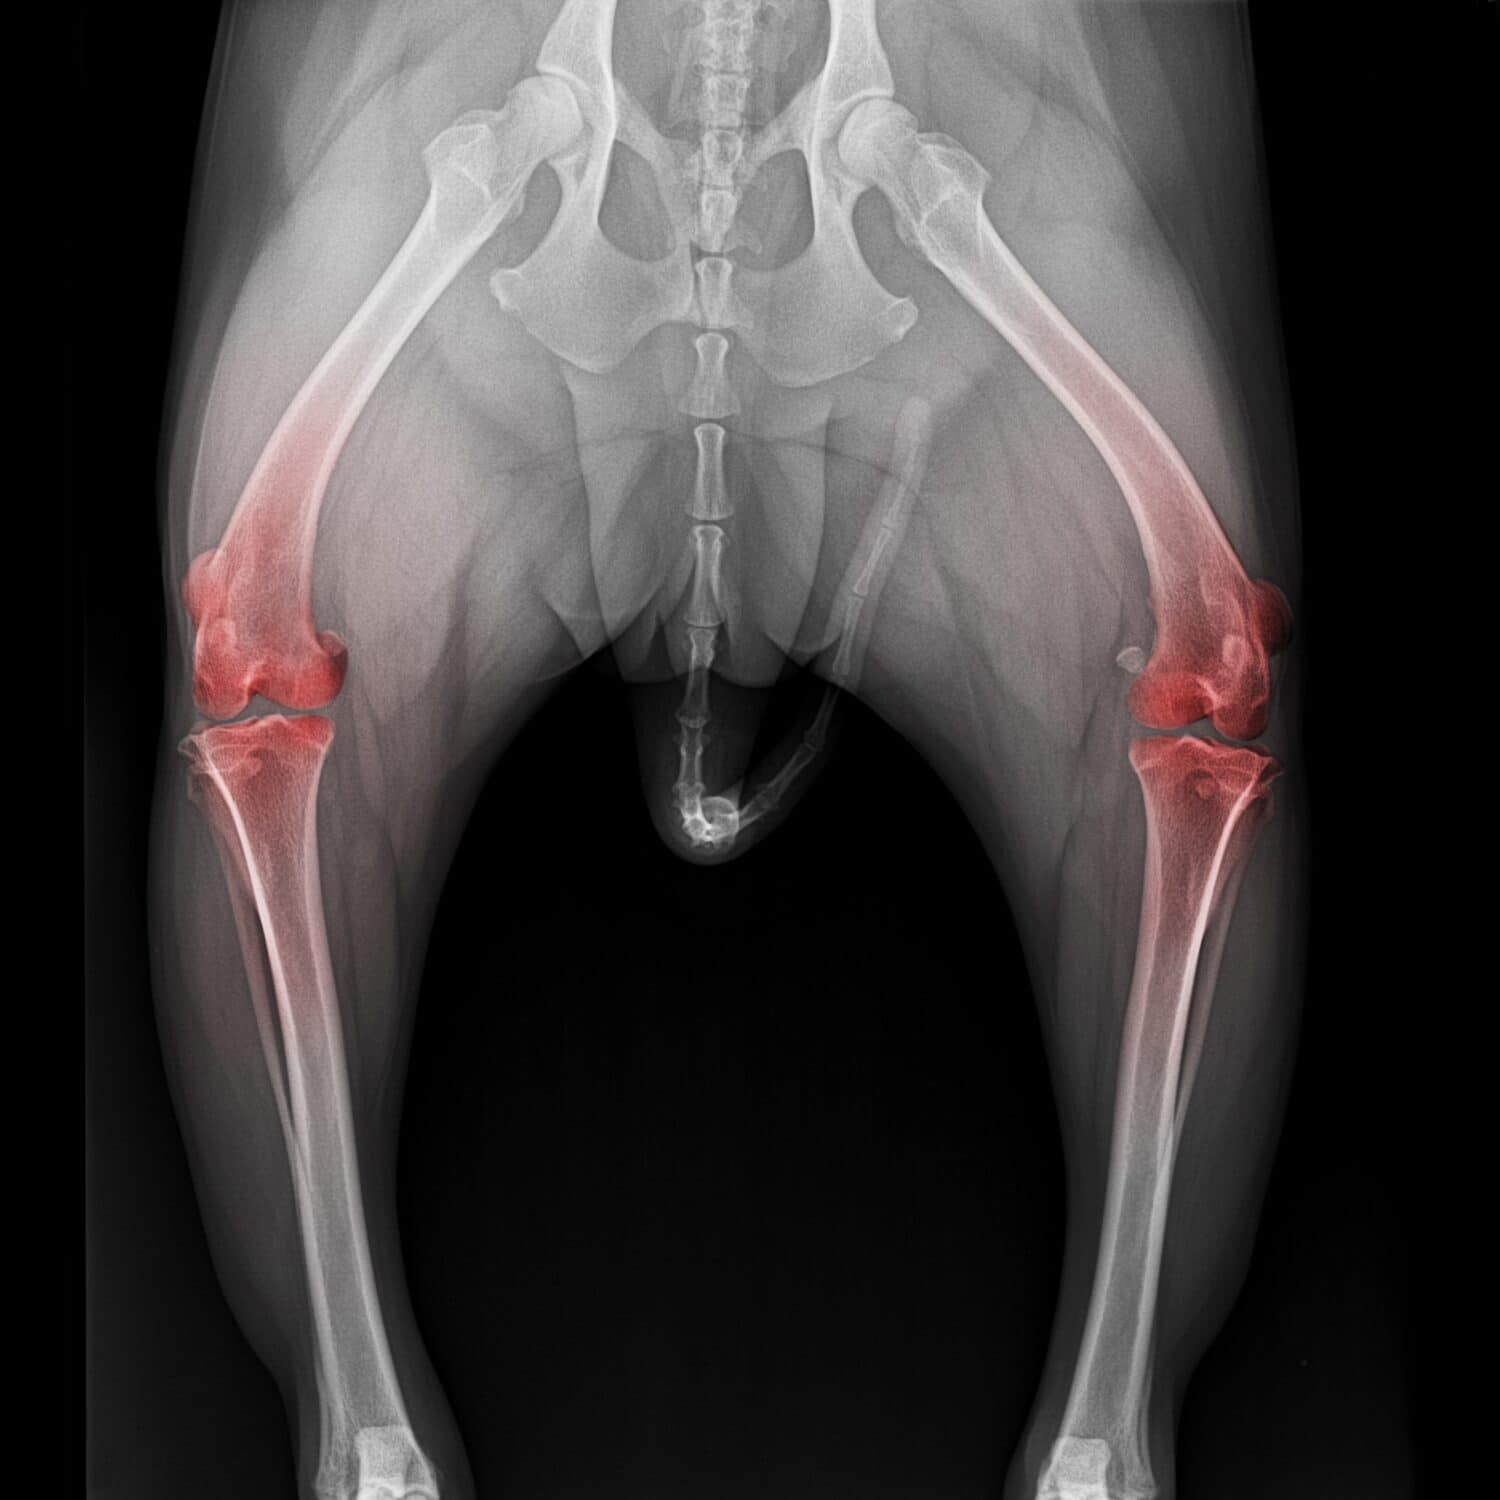 X-ray film pelvis to knee joint of dog anterior view with red highlight on knee joint pain area- veterinary medicine and veterinary anatomy concept- black and white color